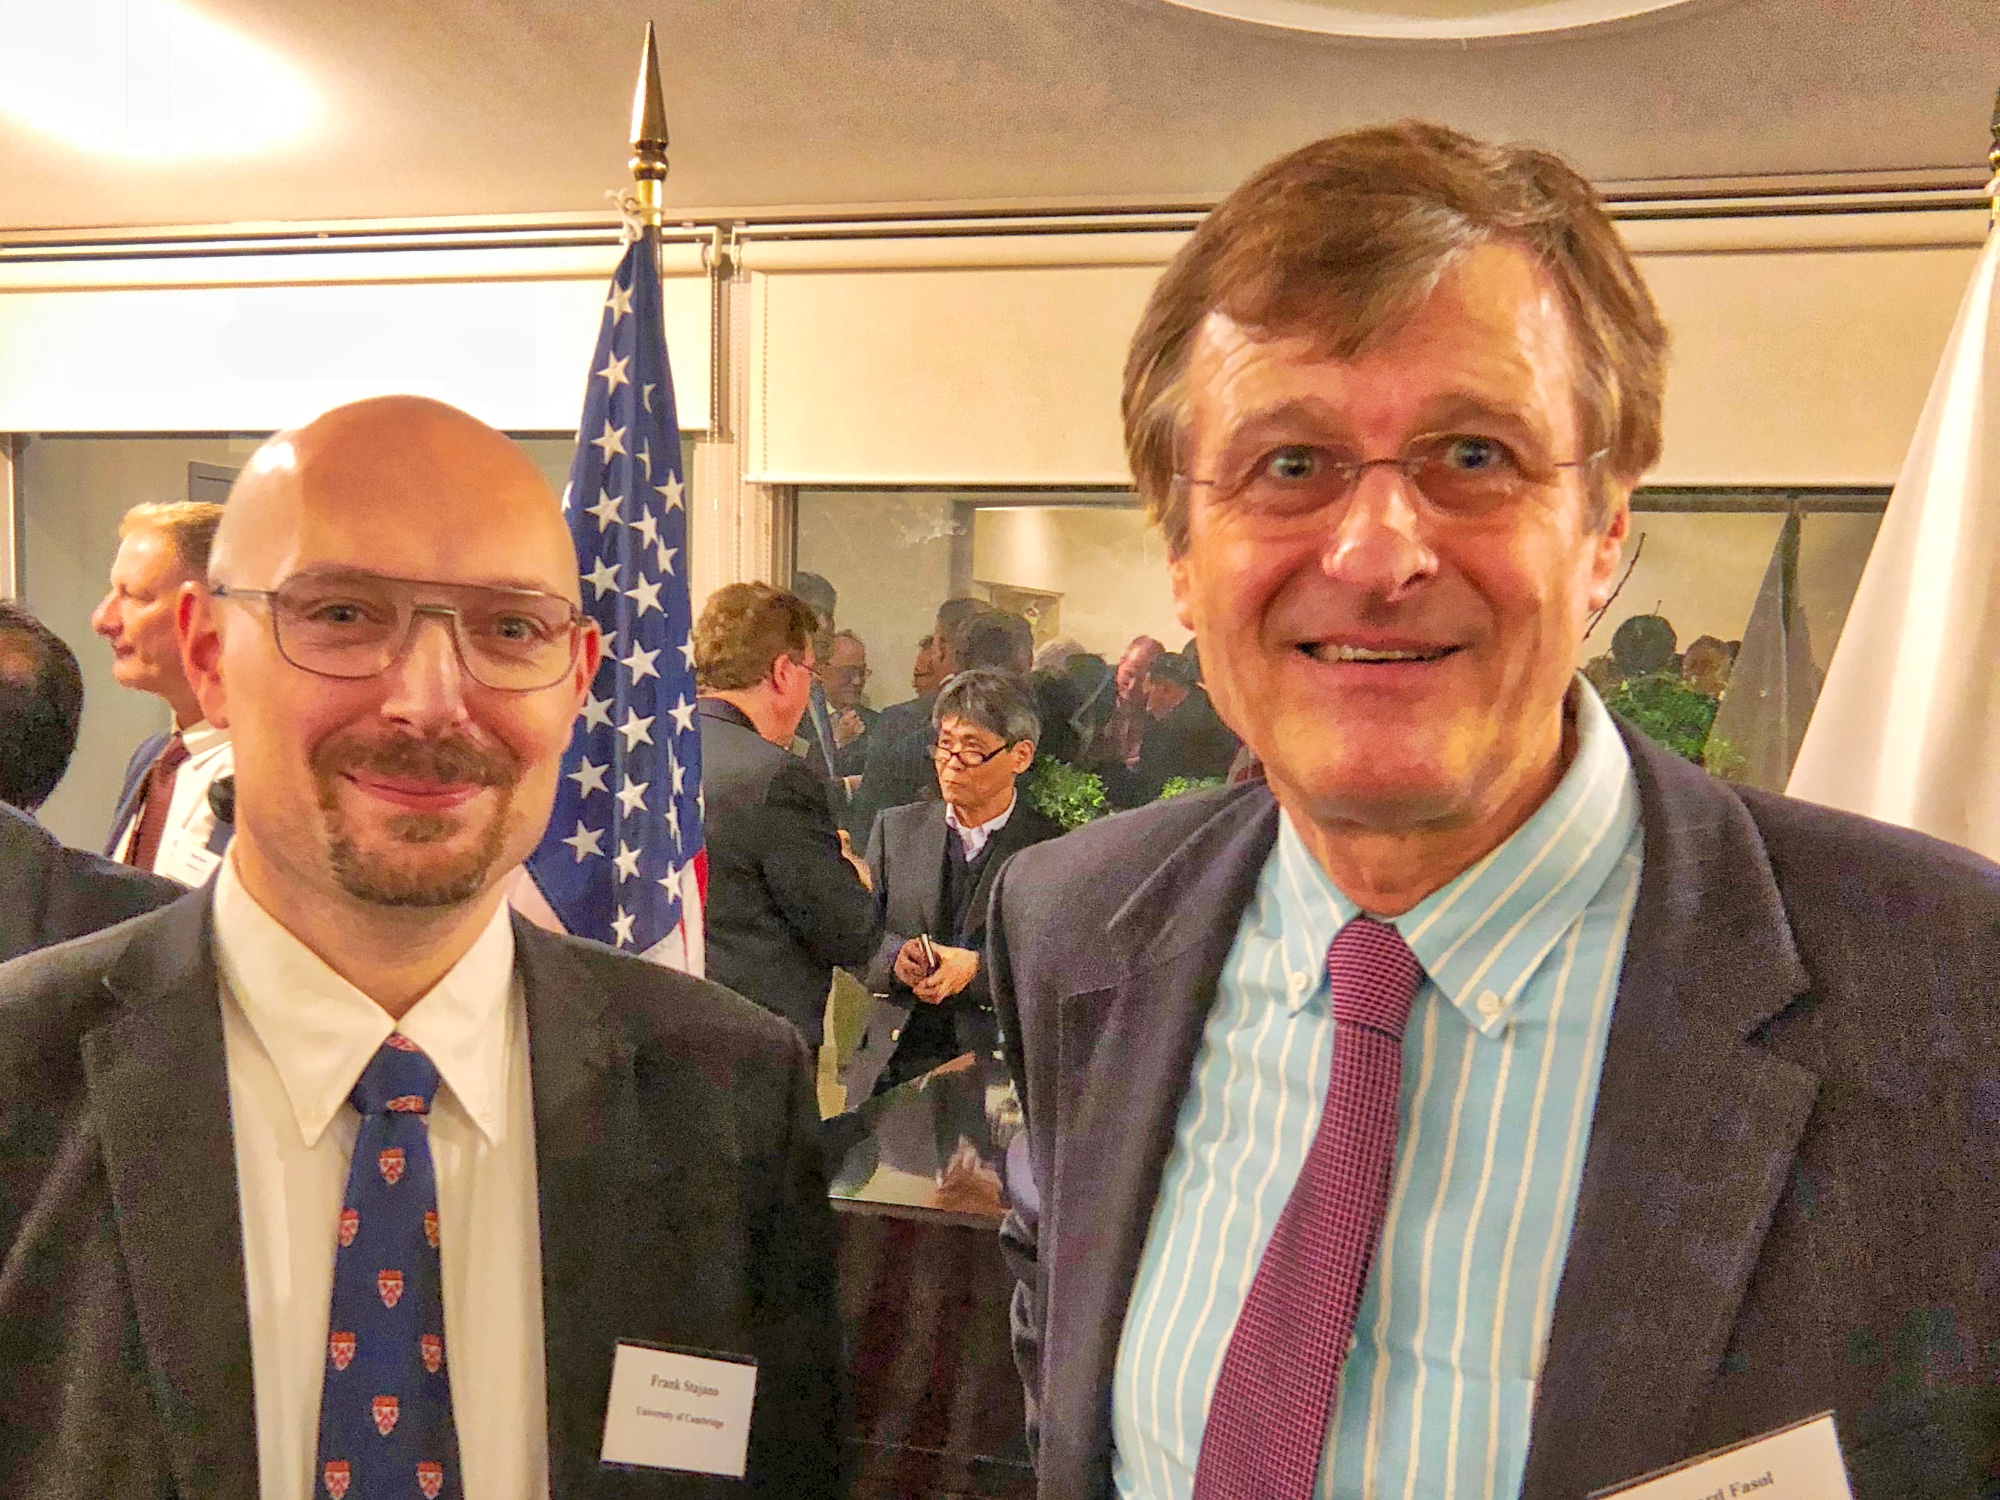 Professor Frank Stajano, Fellow, and Gerhard Fasol at the cyber security conference in Tokyo on 28 March 2018